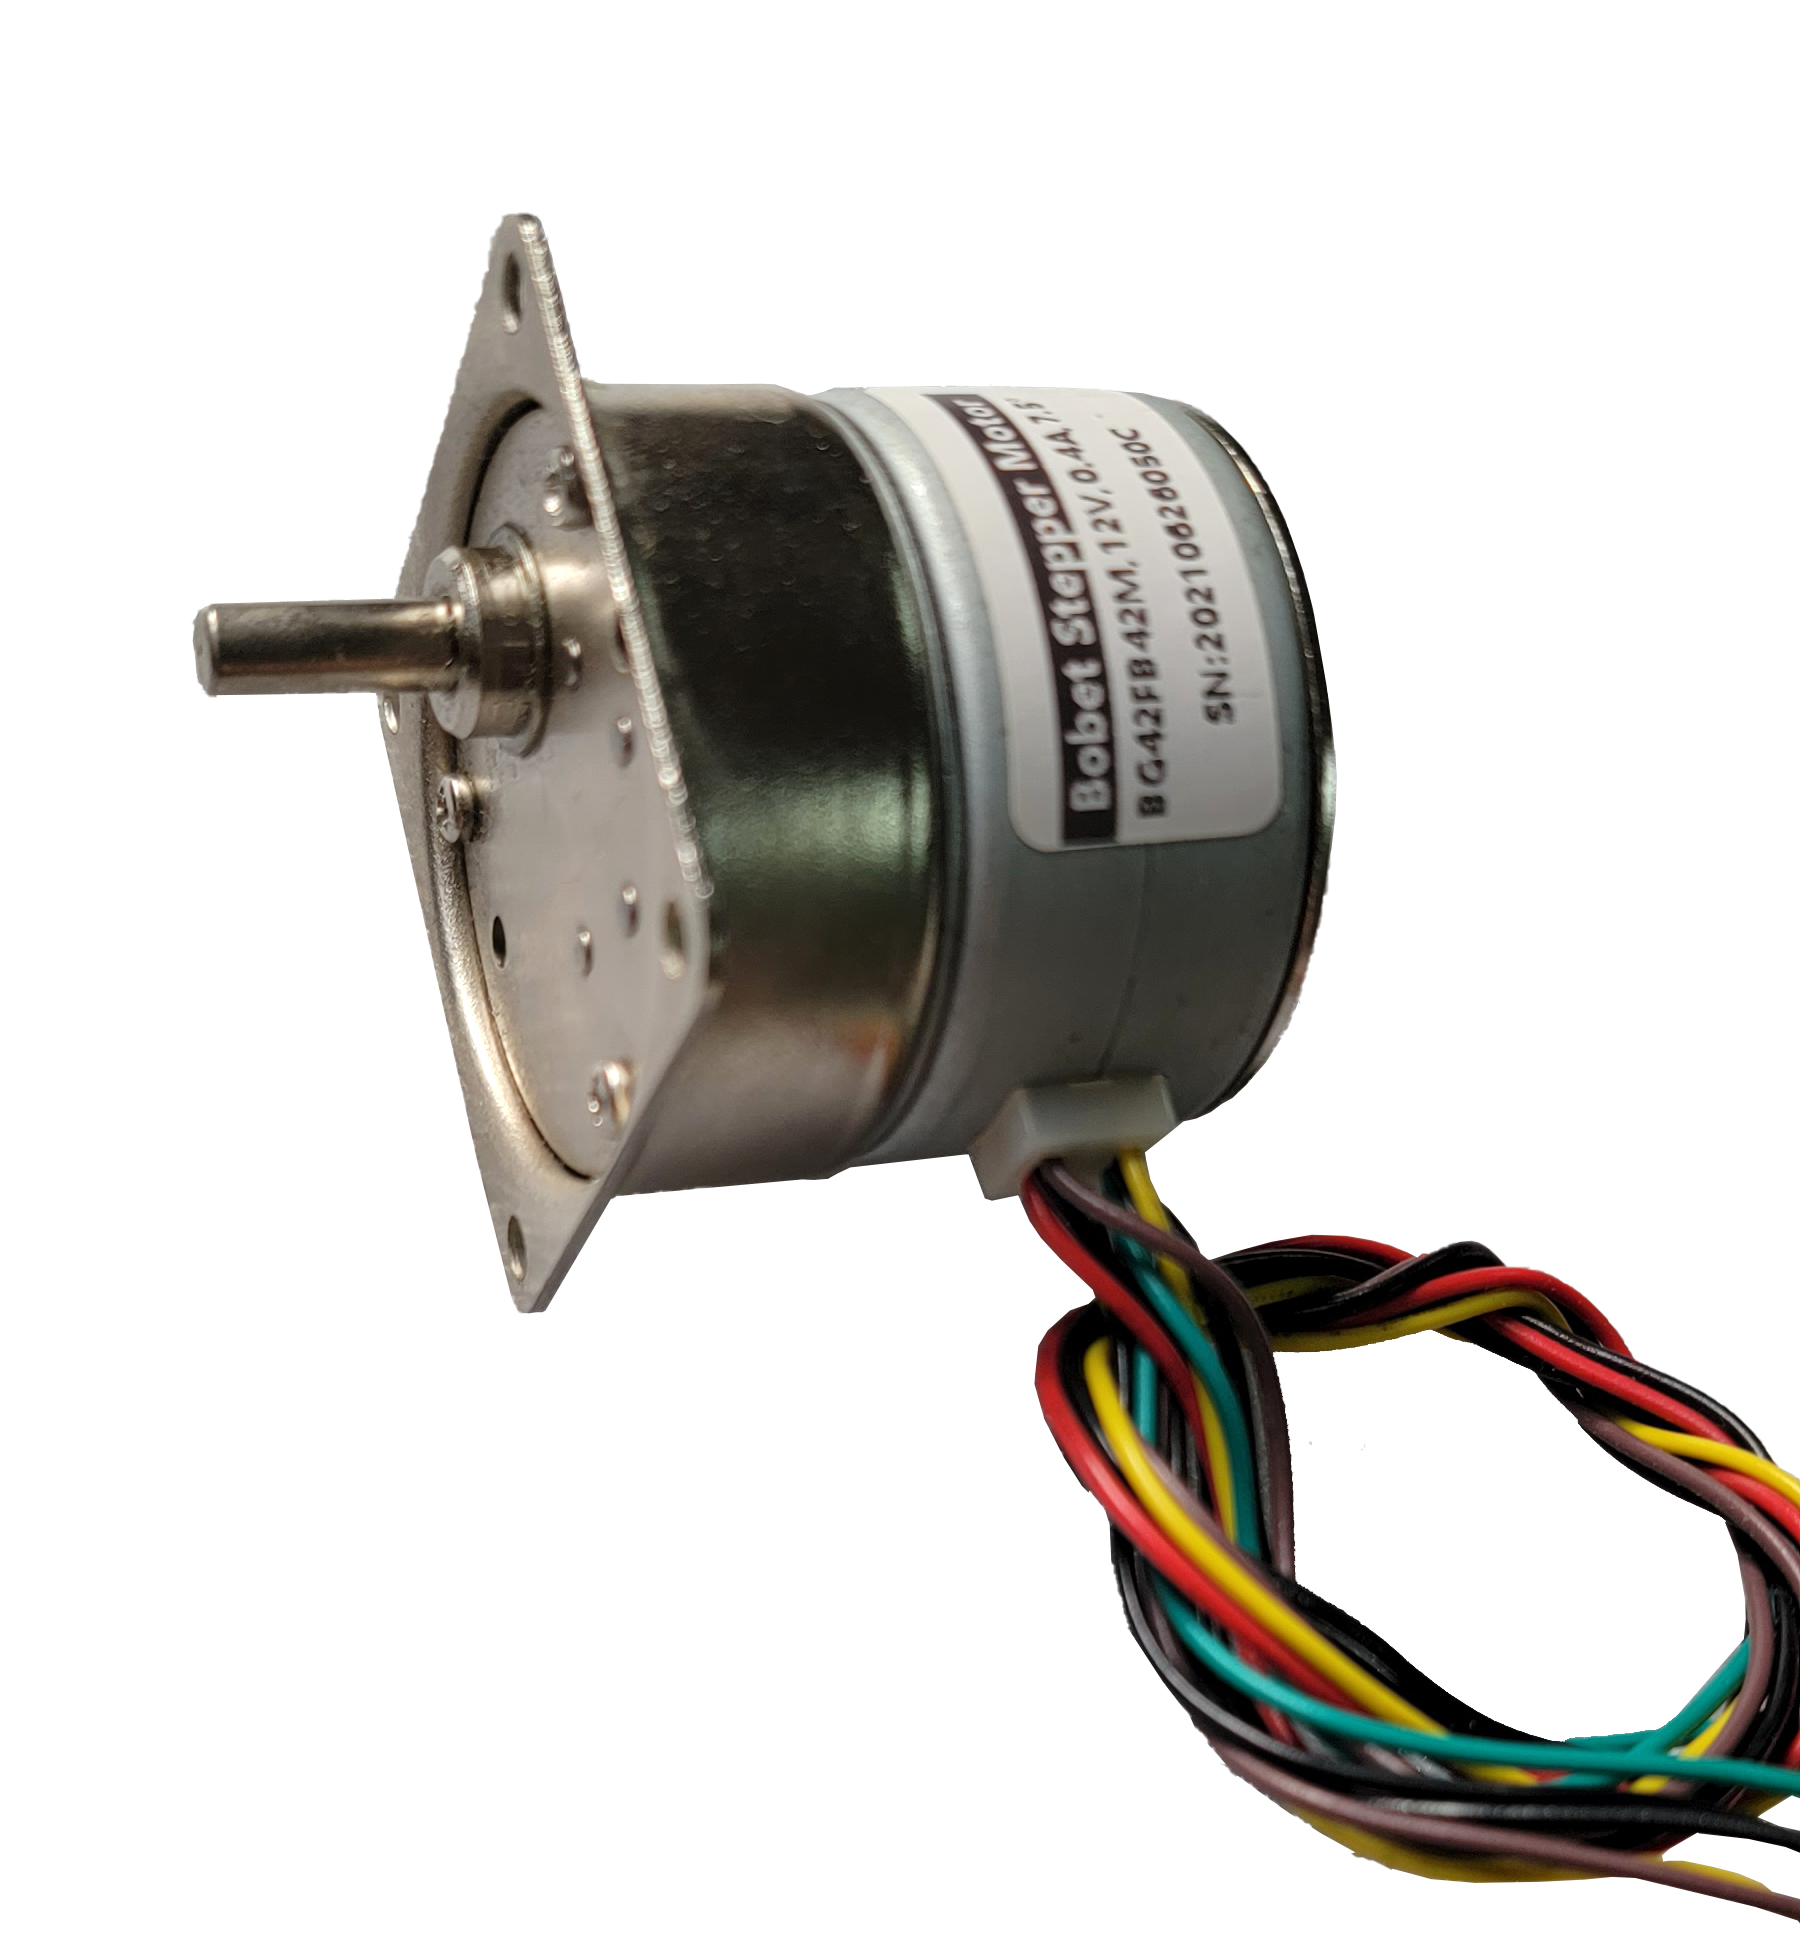 24v Motor With Gearhead Supplier –  42mm 7.5 ° hot item geared stepper motor for tap control, air door control ,medical machine and robot – Bobet